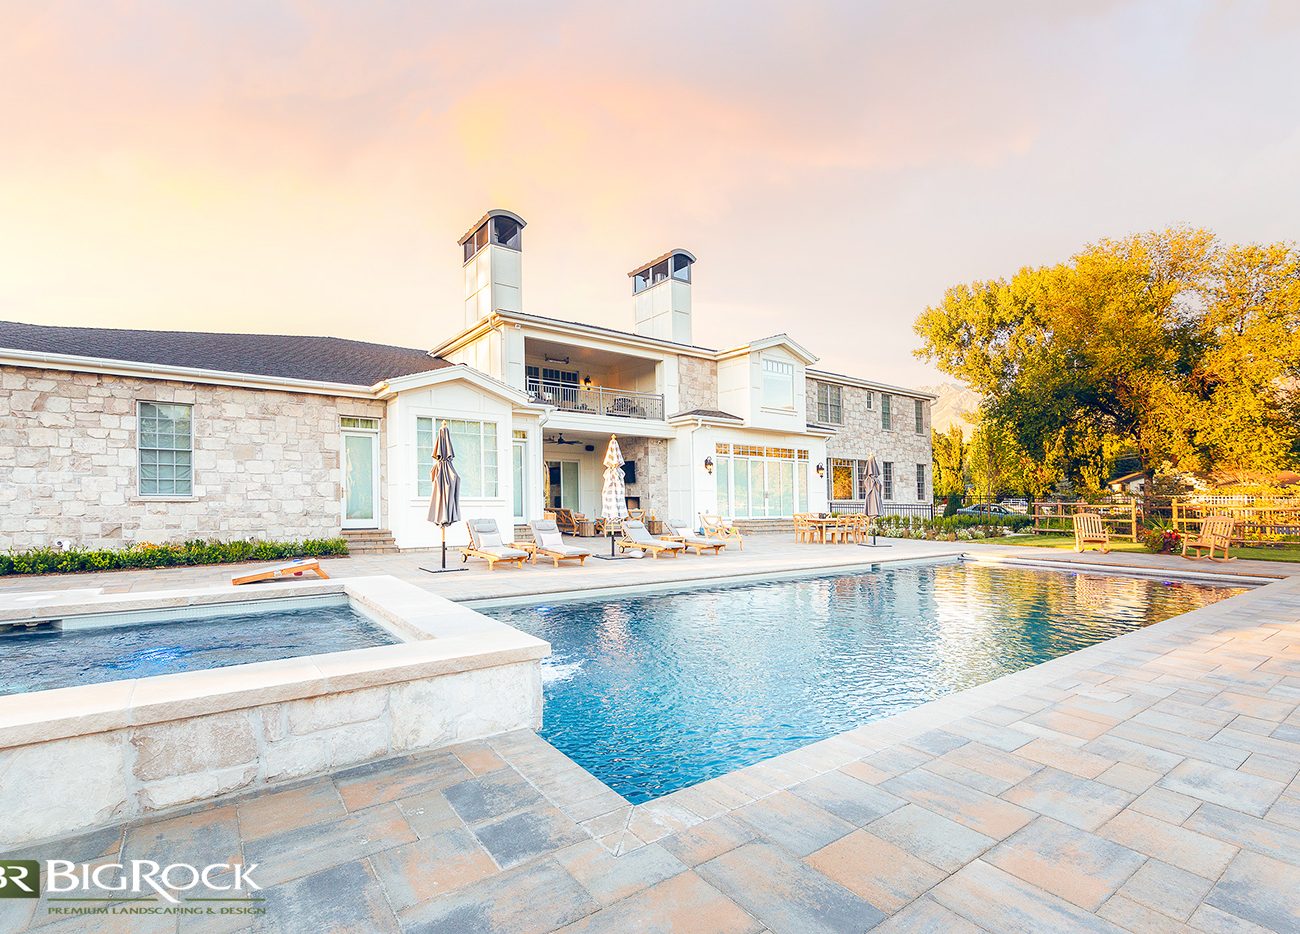 If a backyard pool is an essential part of your backyard landscaping, you will need to spend time and effort planning the best backyard pool patio design to complement your home landscaping.